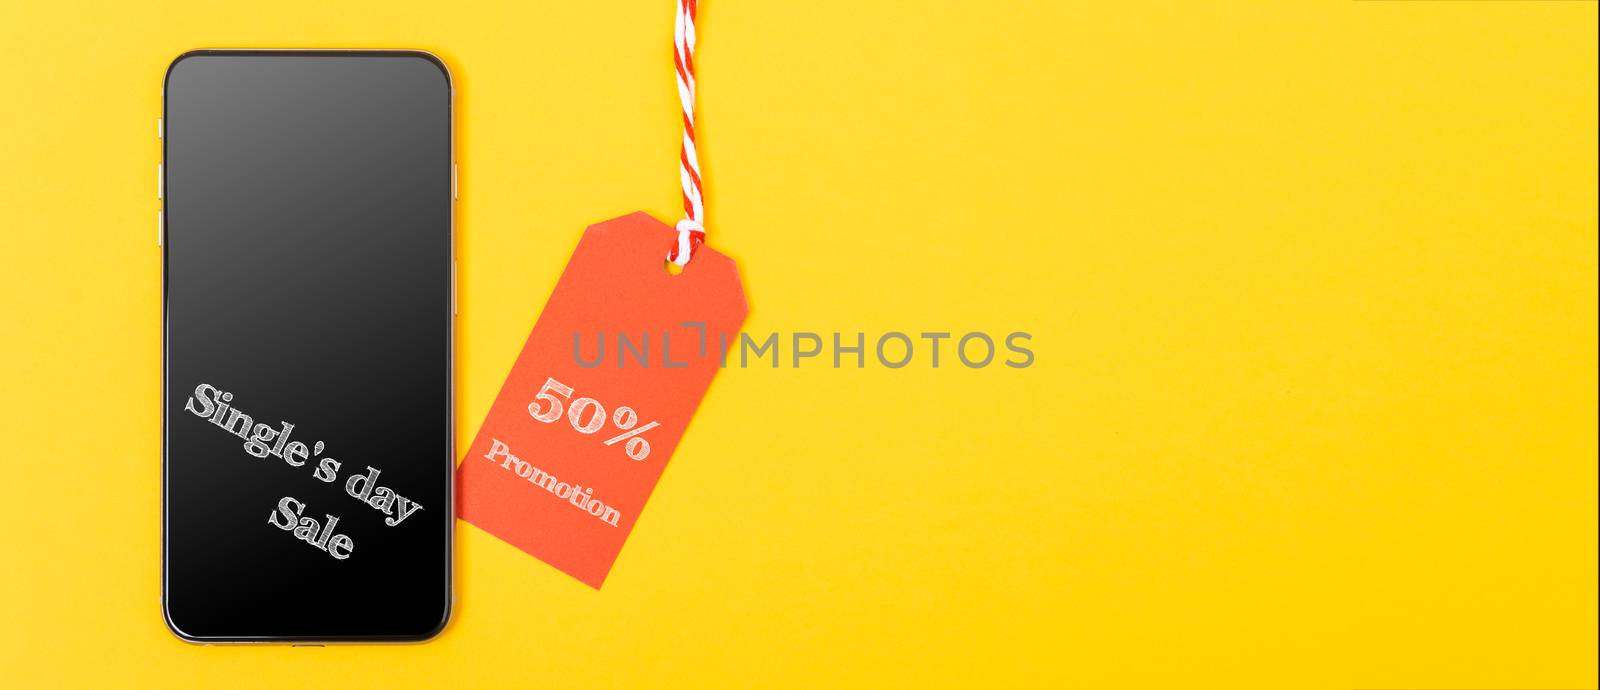 Internet Online shopping,  Single's day sale text red tag and Smartphone blank screen on yellow background